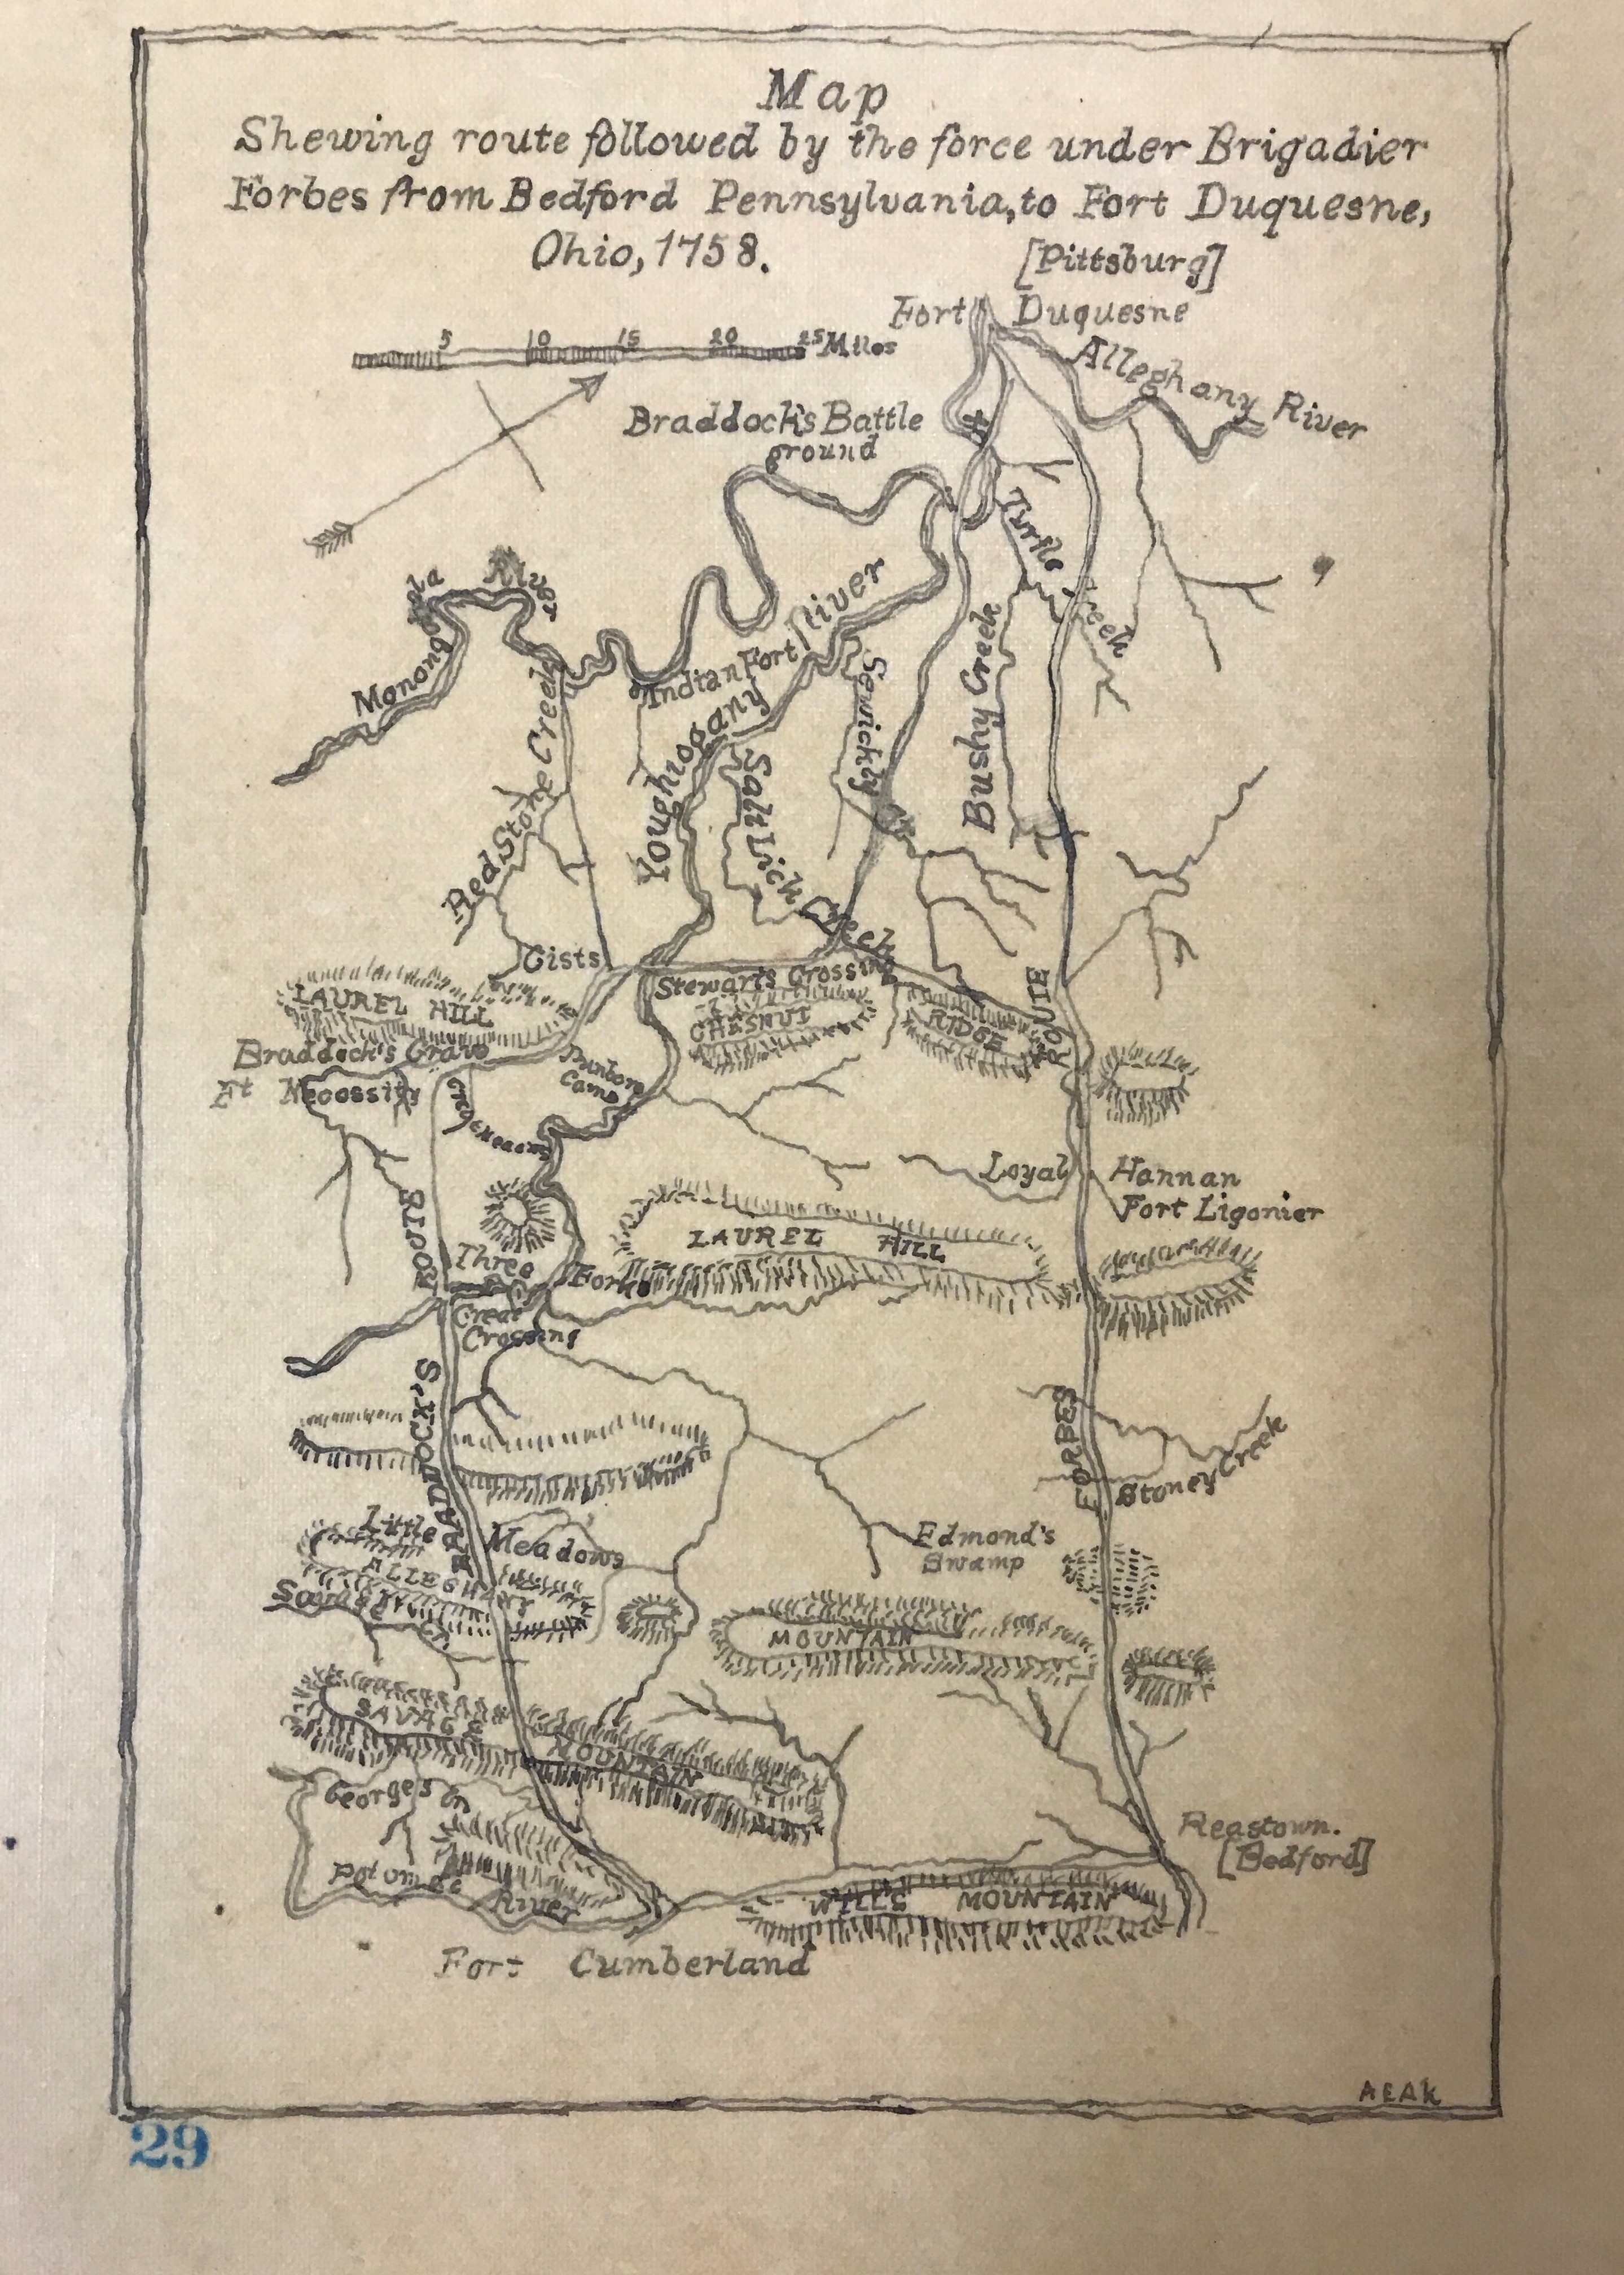 Aeak map of the route followed from Bedford by Forbes in 1758